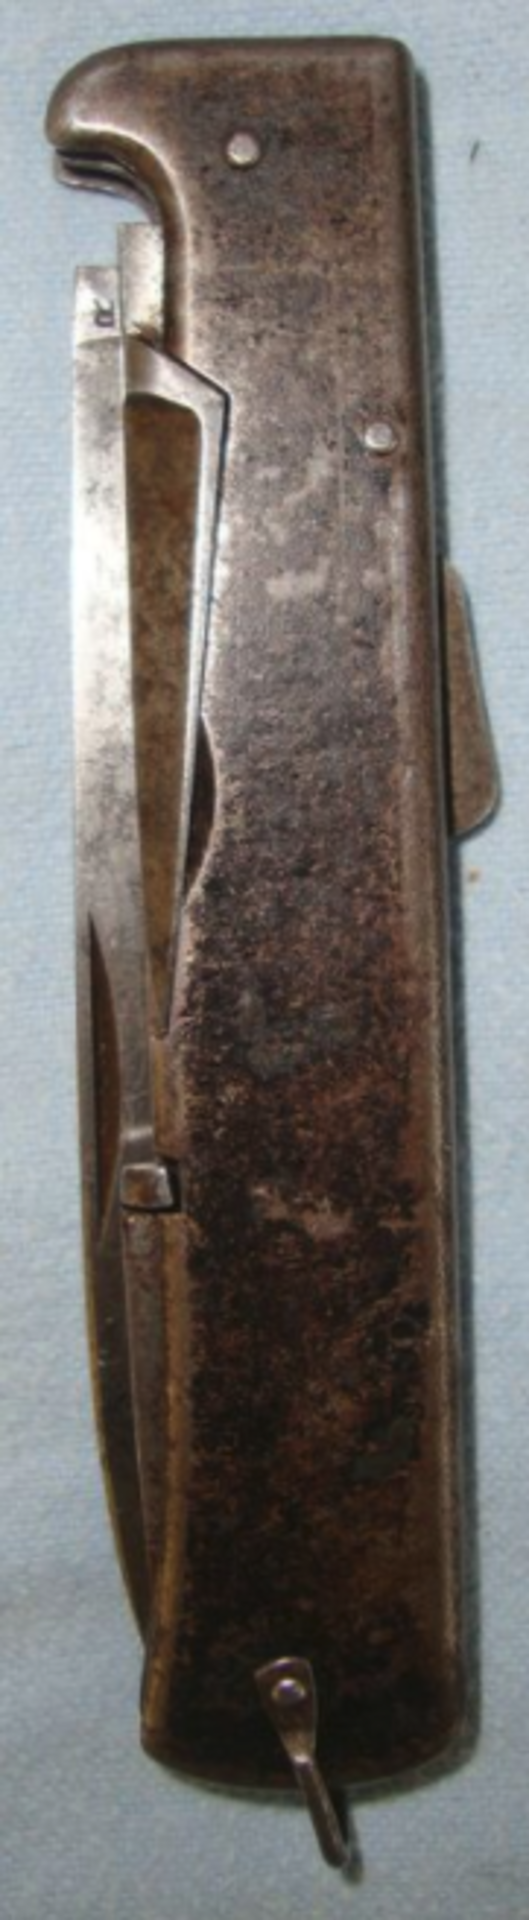 WW1/WW2 Imperial German Army Taschenmesser Trench Dagger/ Utility Clasp Lock knife By Mercator - Image 3 of 3